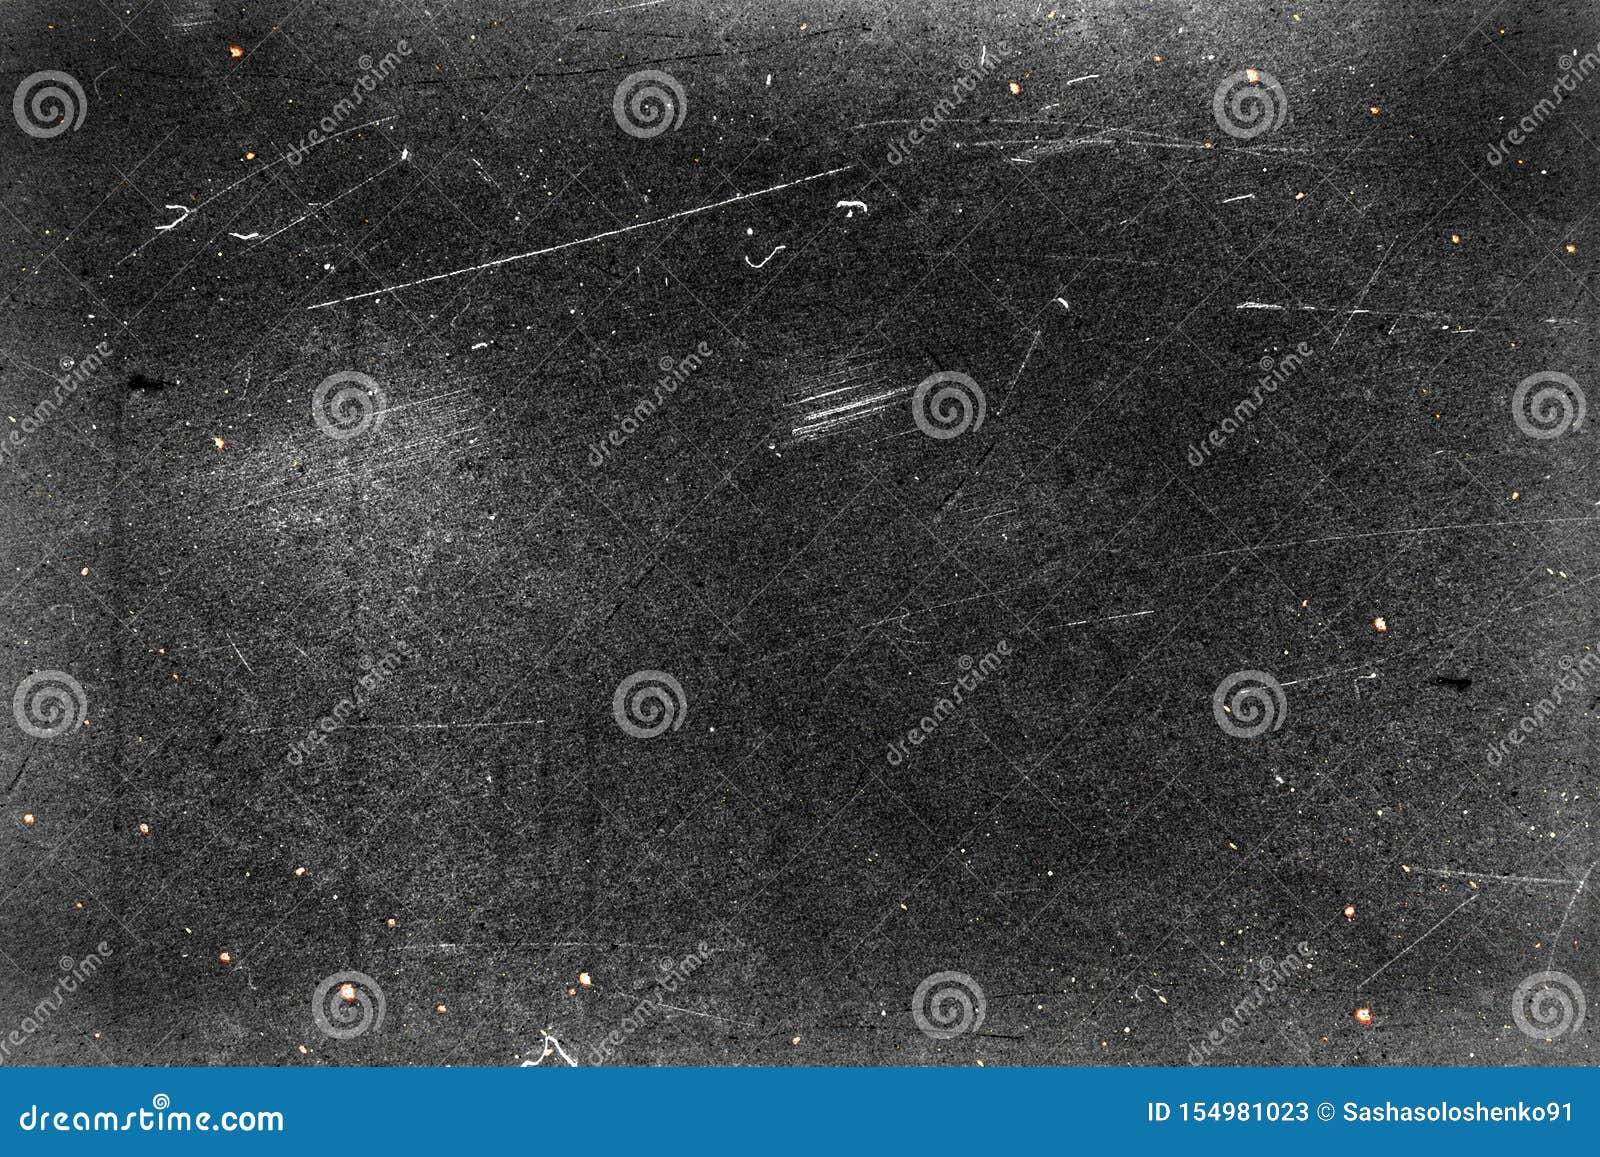 abstract black background with vintage grunge texture , old rough paper banner.